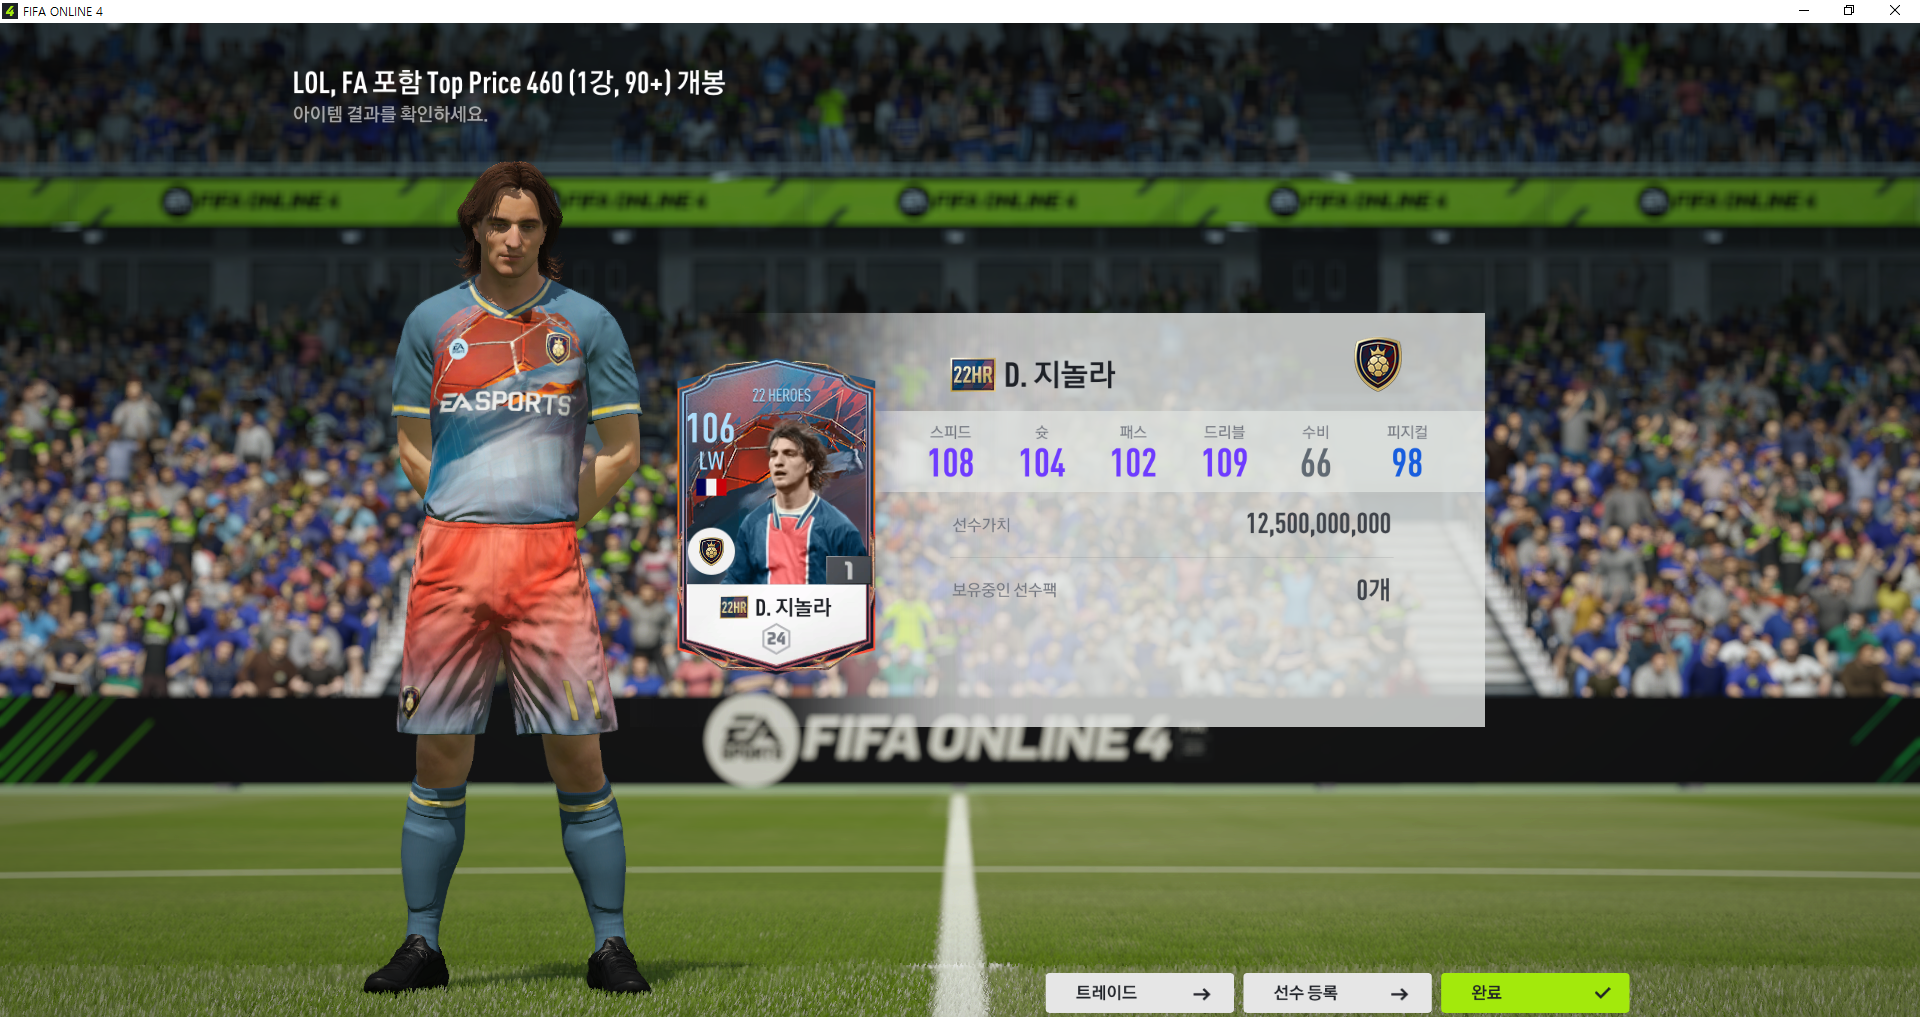 FIFA ONLINE 4 2022-05-14 오후 2_54_08.png